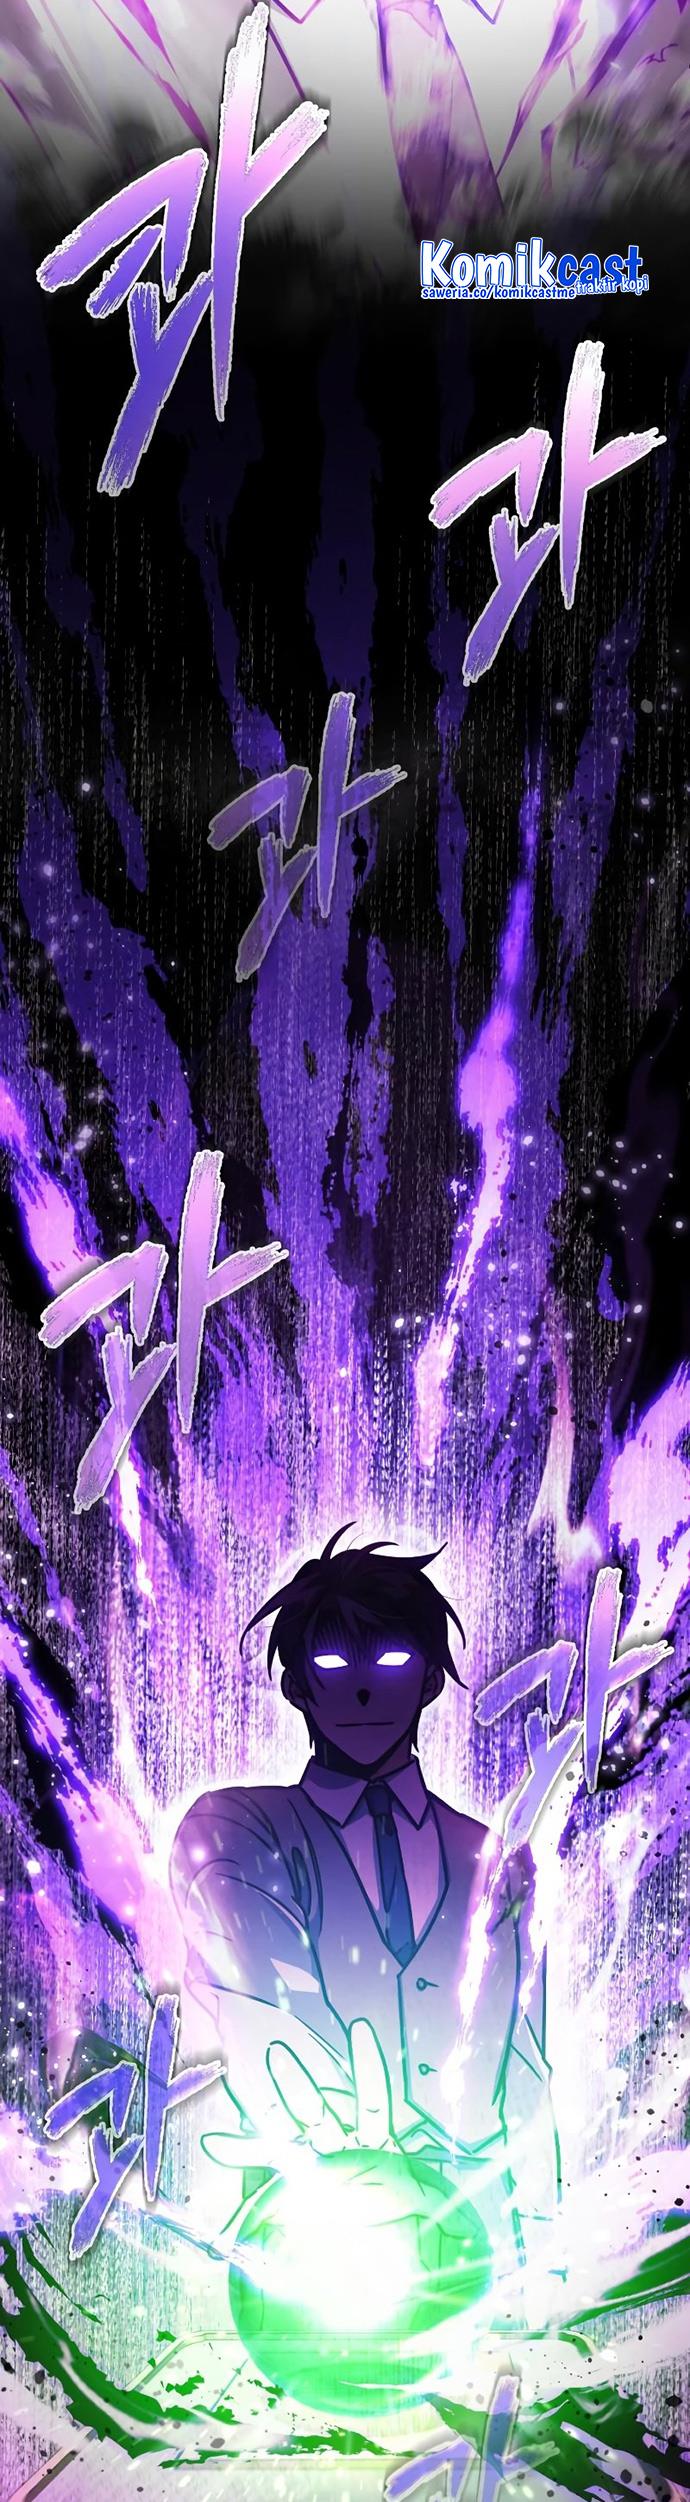 The Heavenly Demon Can’t Live a Normal Life Chapter 50